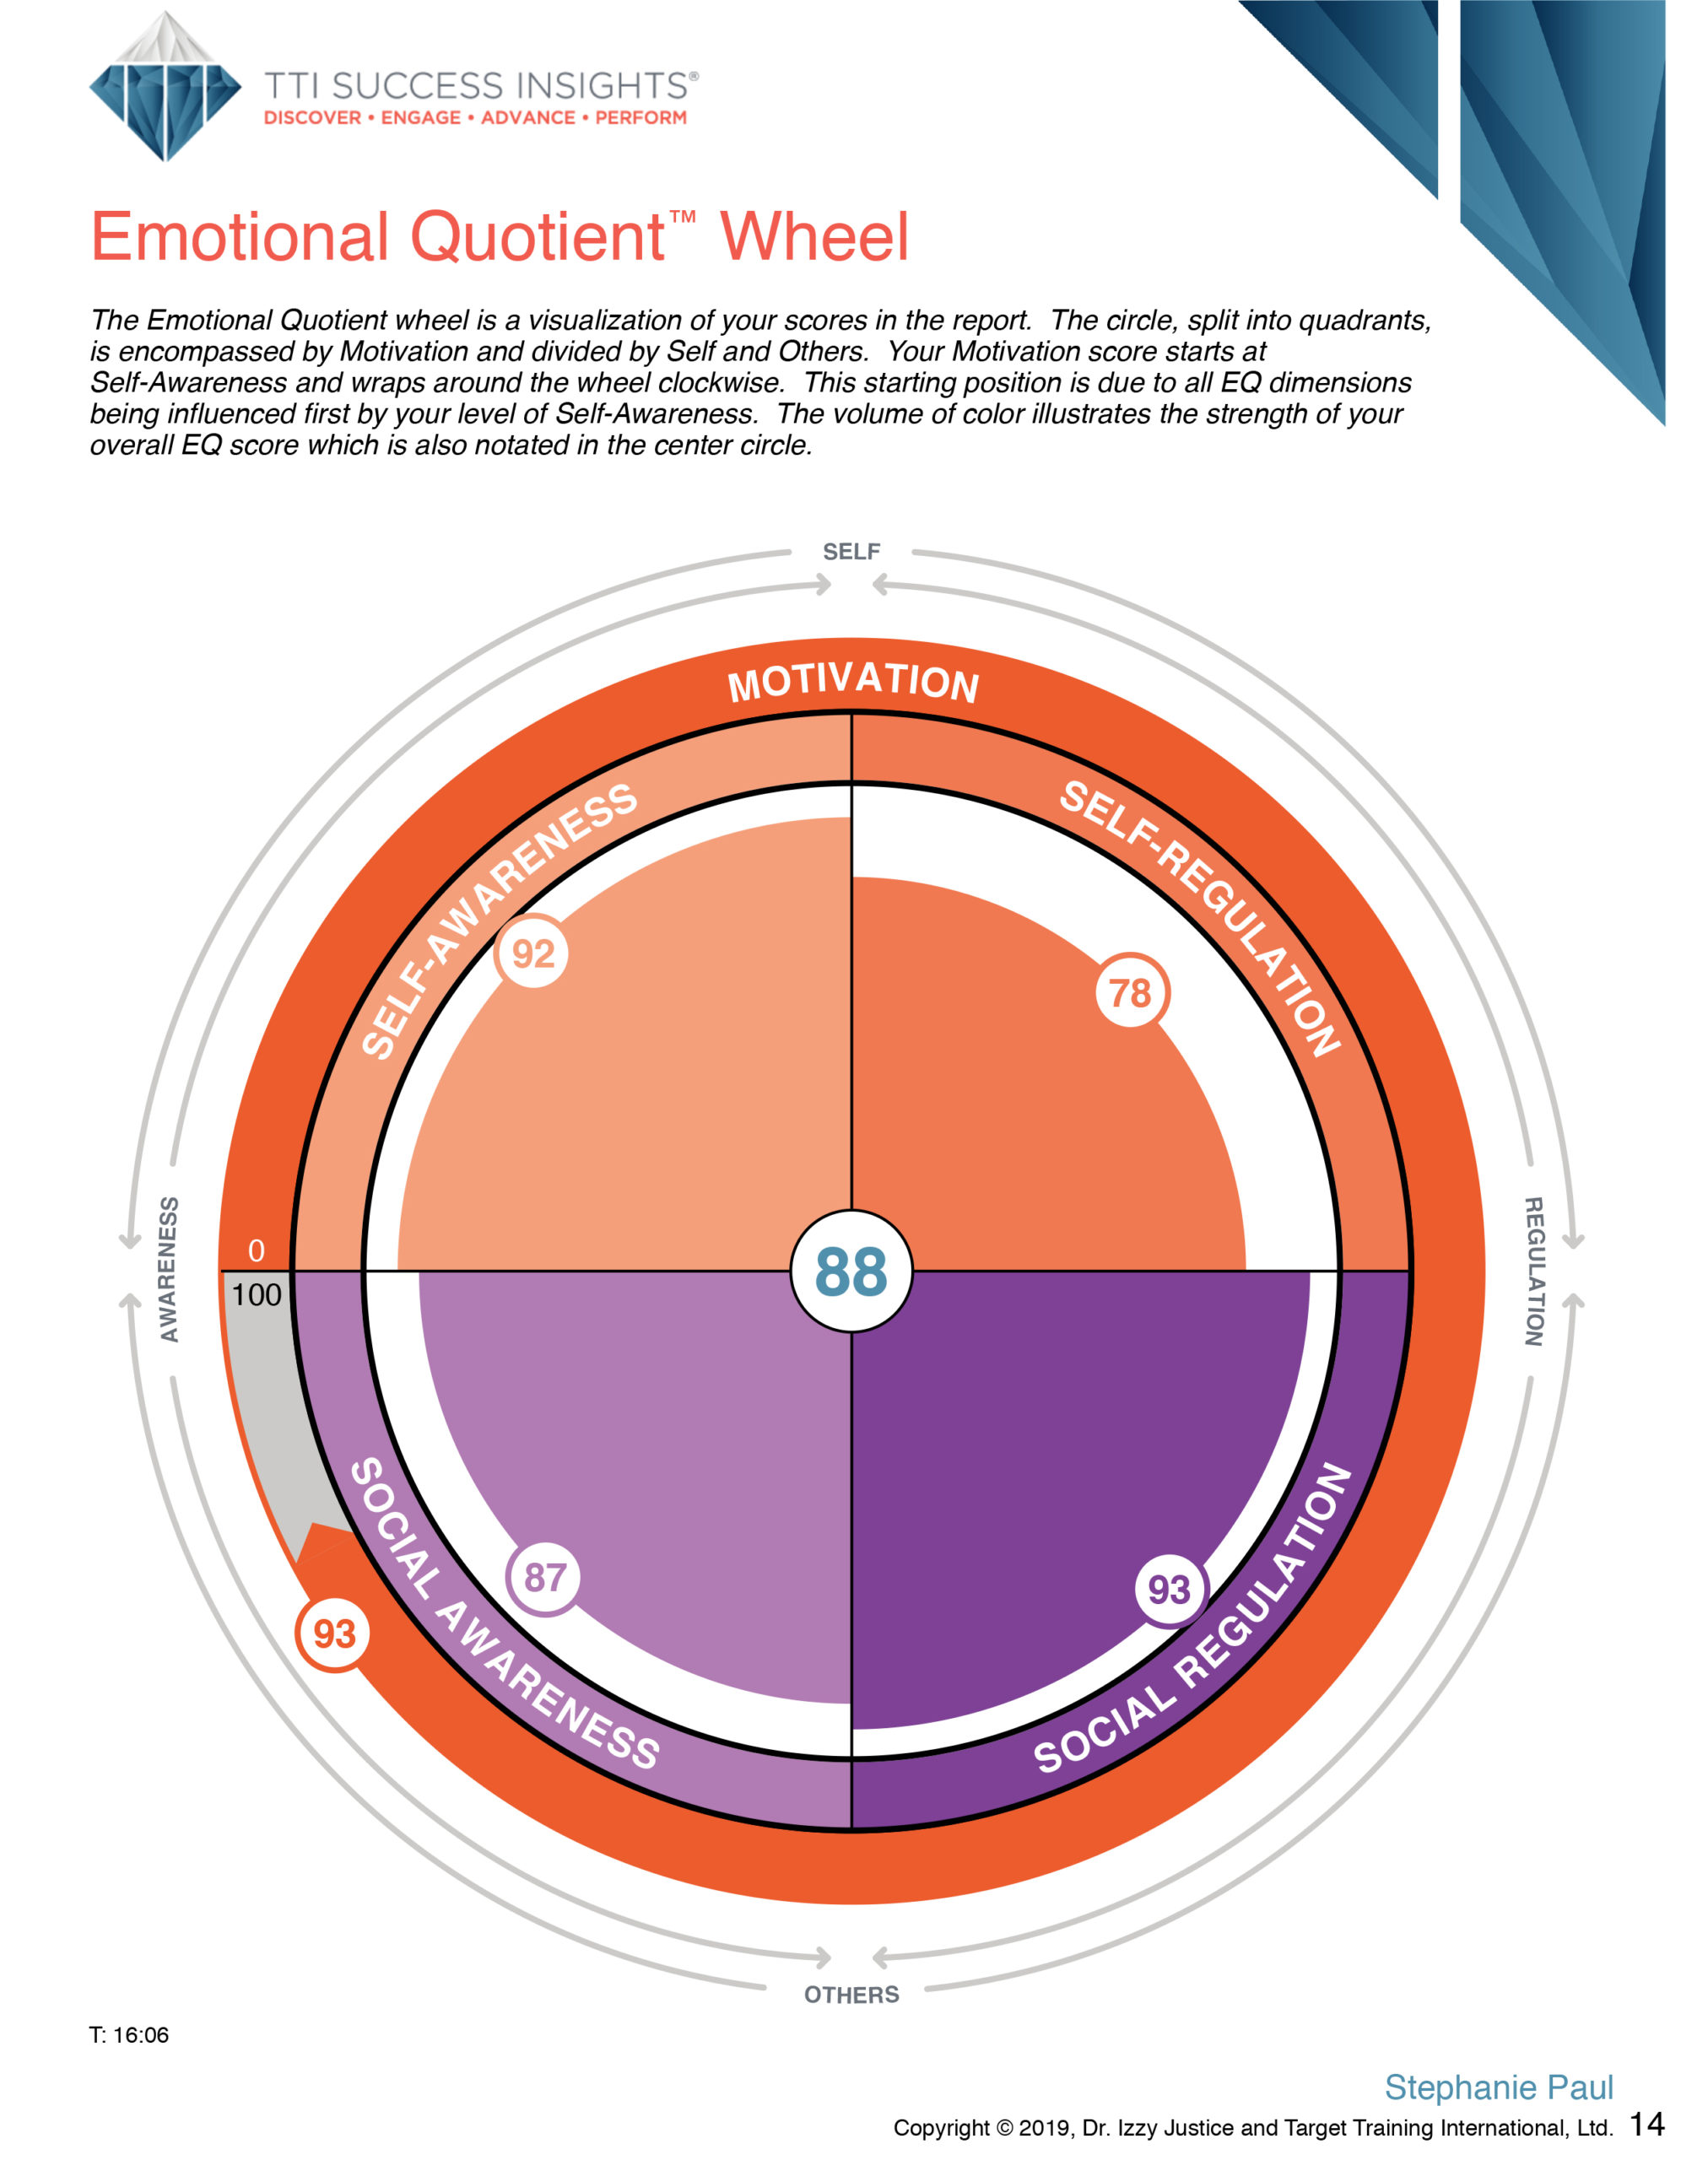 A circular diagram in orange and purple colors with the words motivation, self-awareness, self-regulation, social awareness, and social regulation.